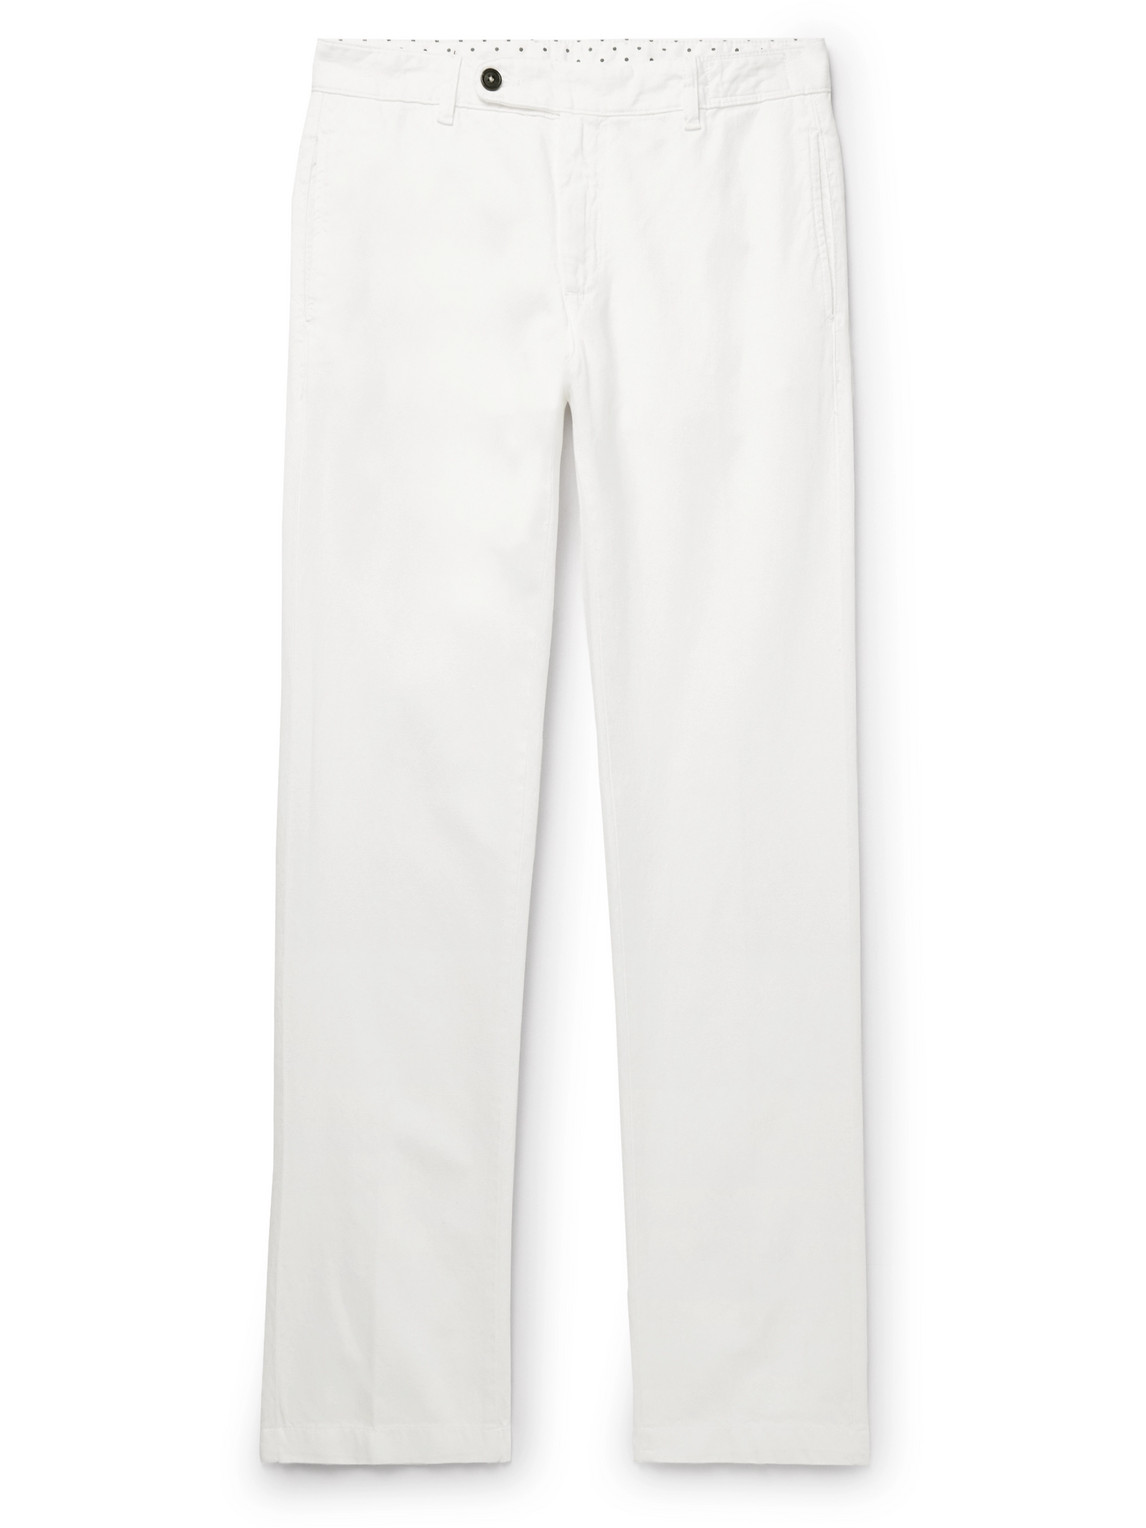 Winch2 Slim-Fit Cotton and Linen-Blend Trousers